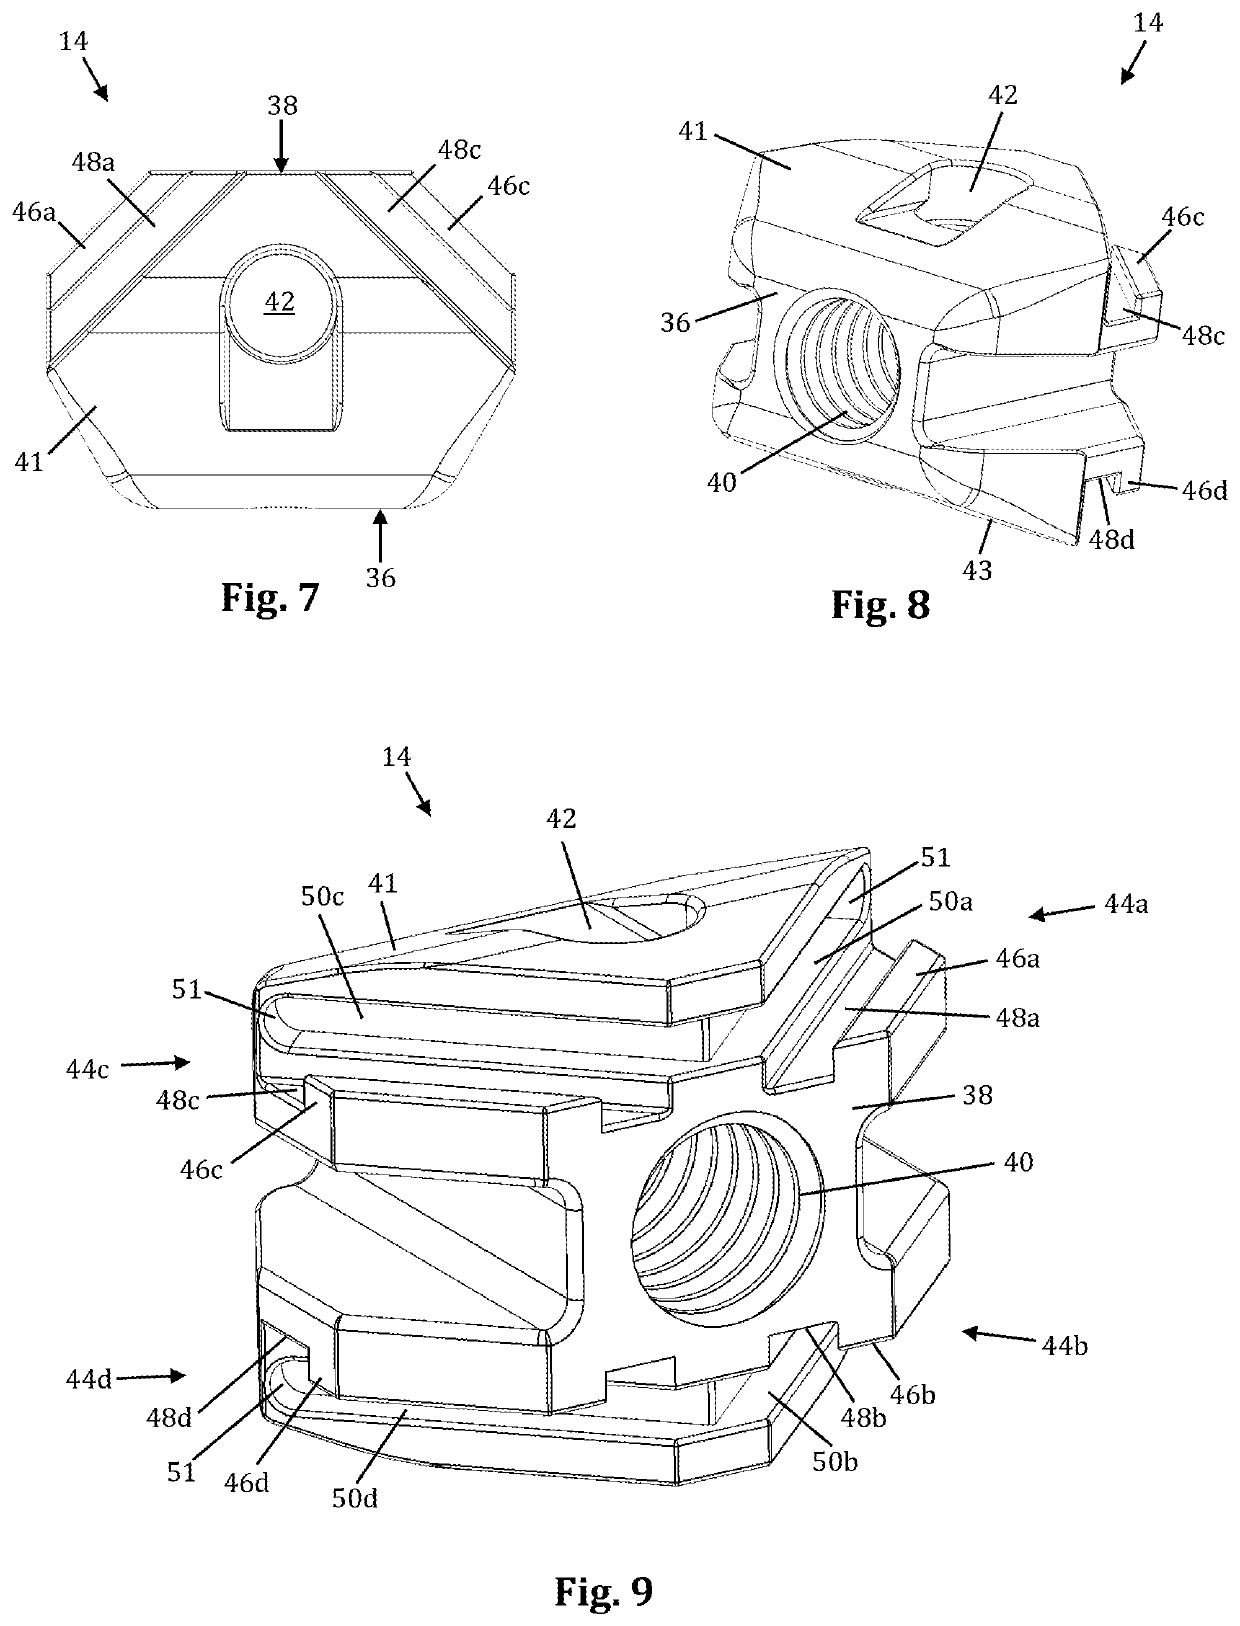 Expandable fusion device with independent expansion systems